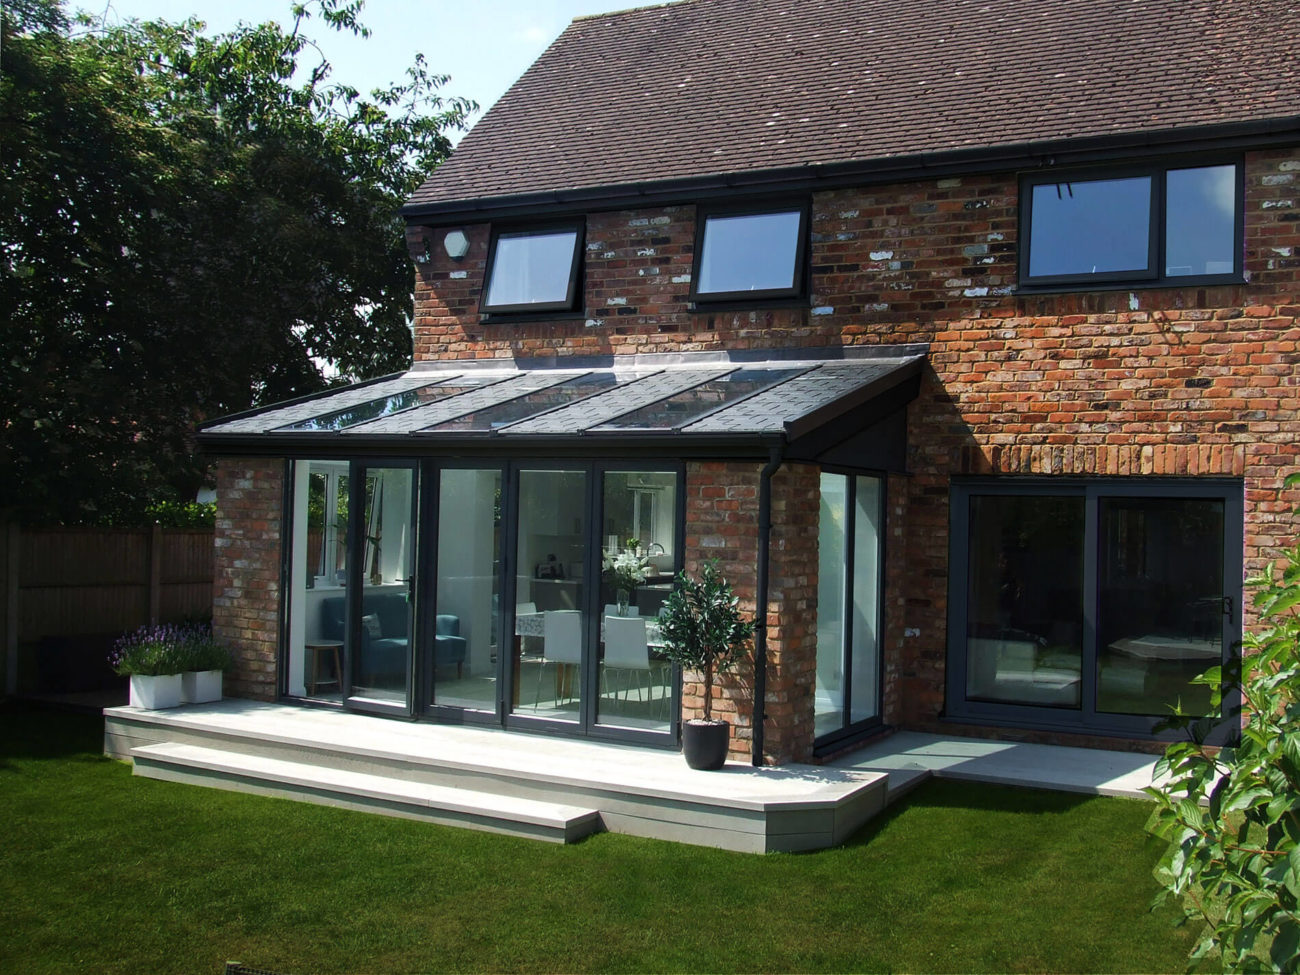 What Can You Use a Conservatory Or Orangery For?